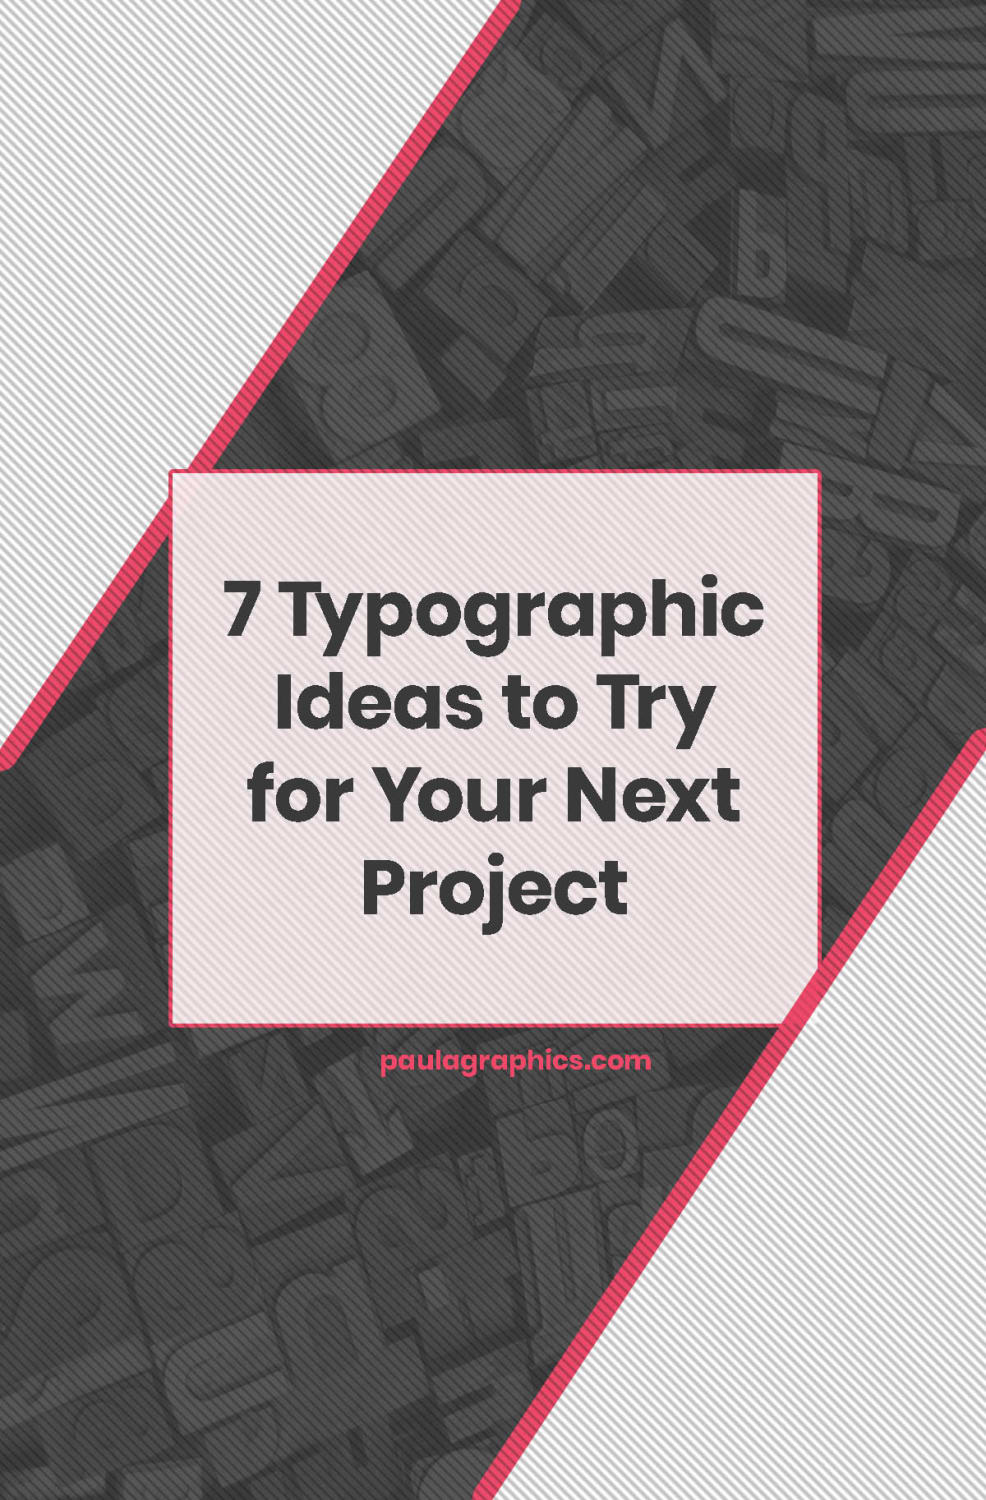 7 Typographic Ideas to Try for Your Next Project